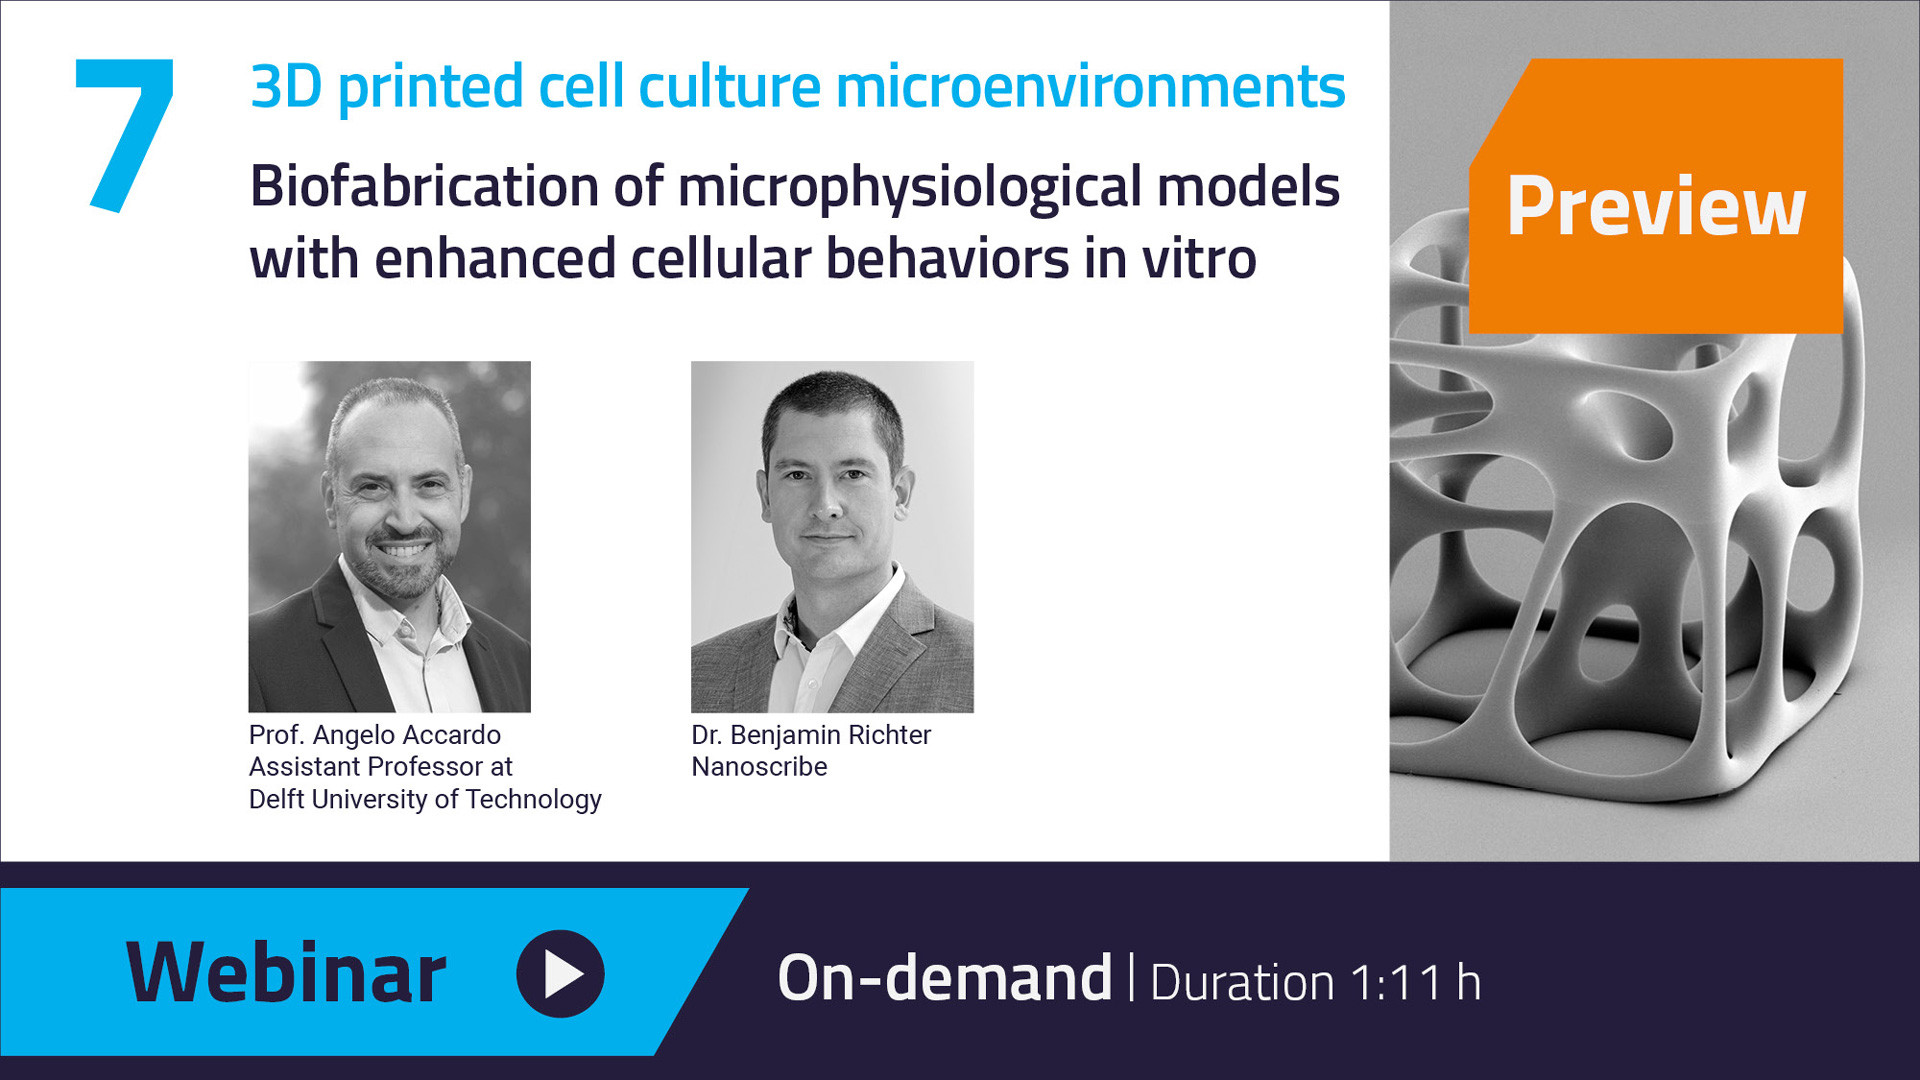 Our Webinar on 3D printed cell cultures is now available on-demand - watch the webinar here